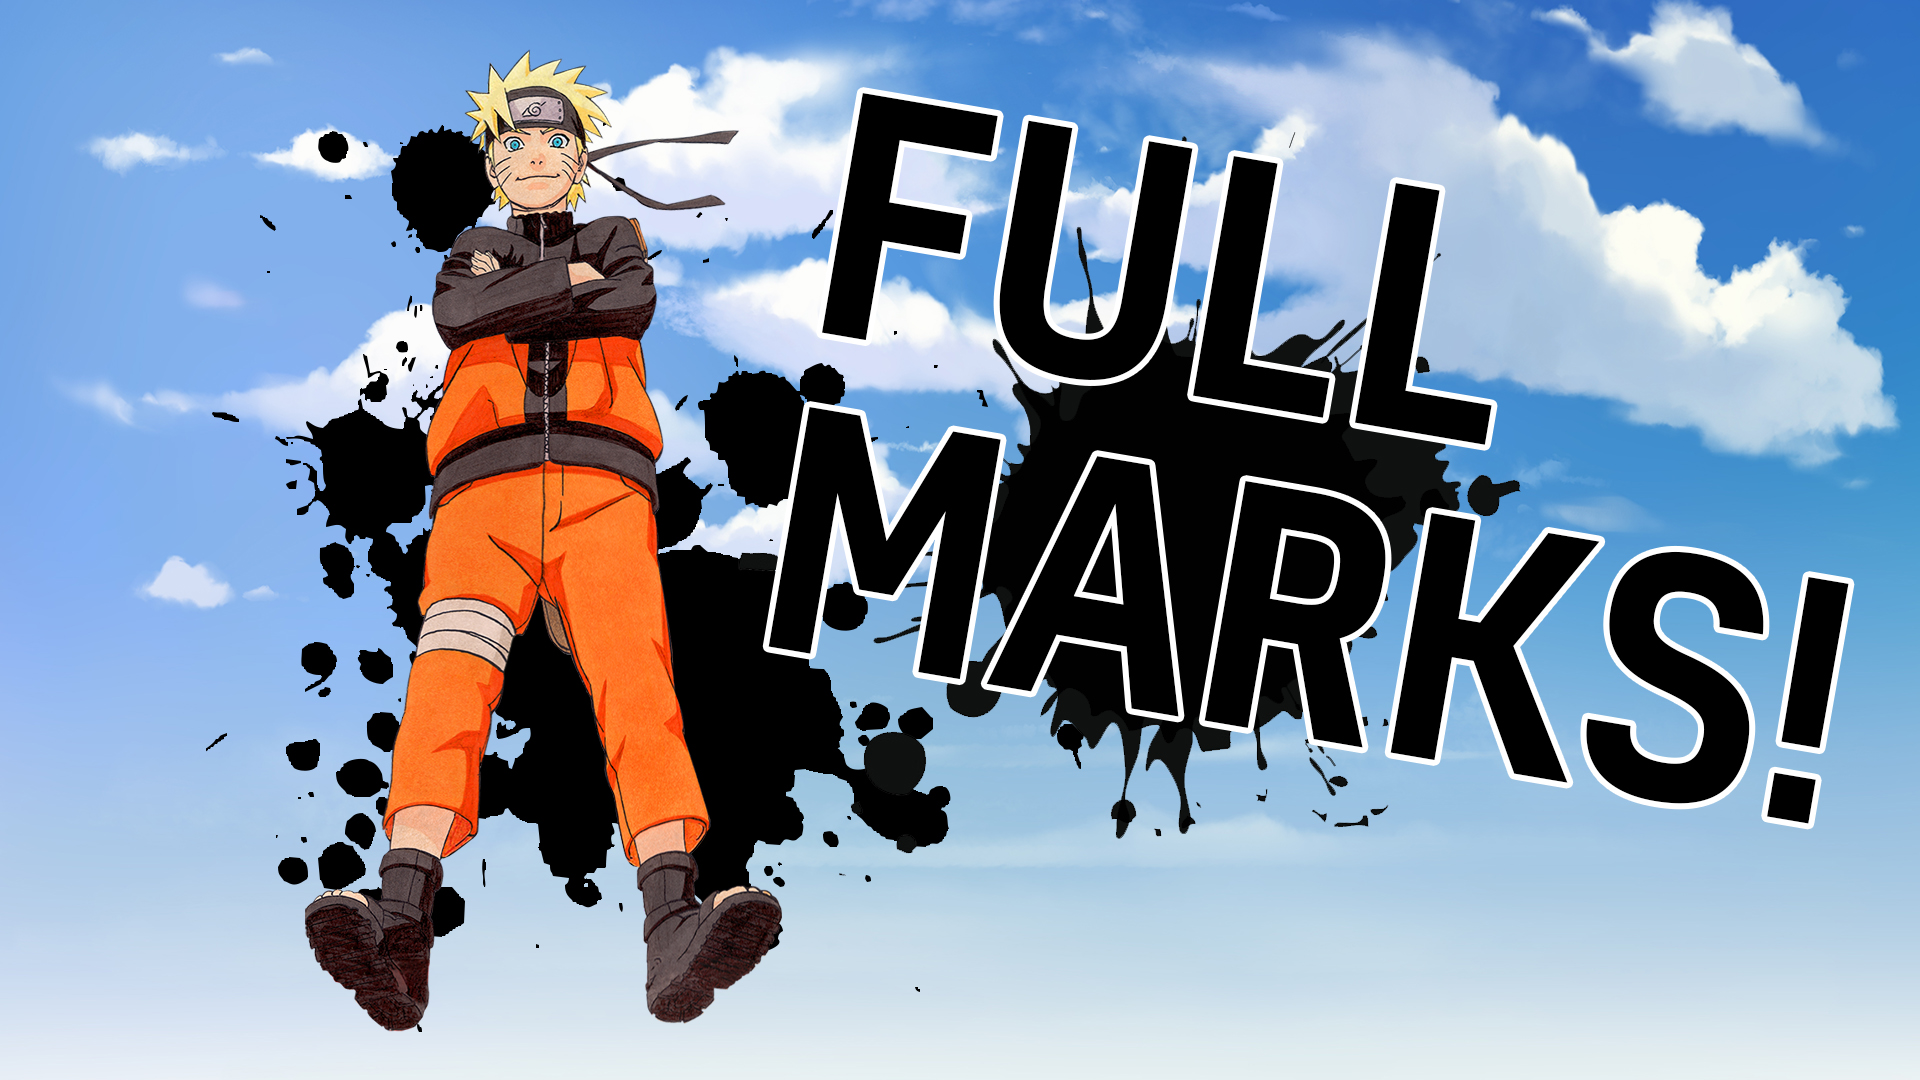 Naruto stands in the sky smiling